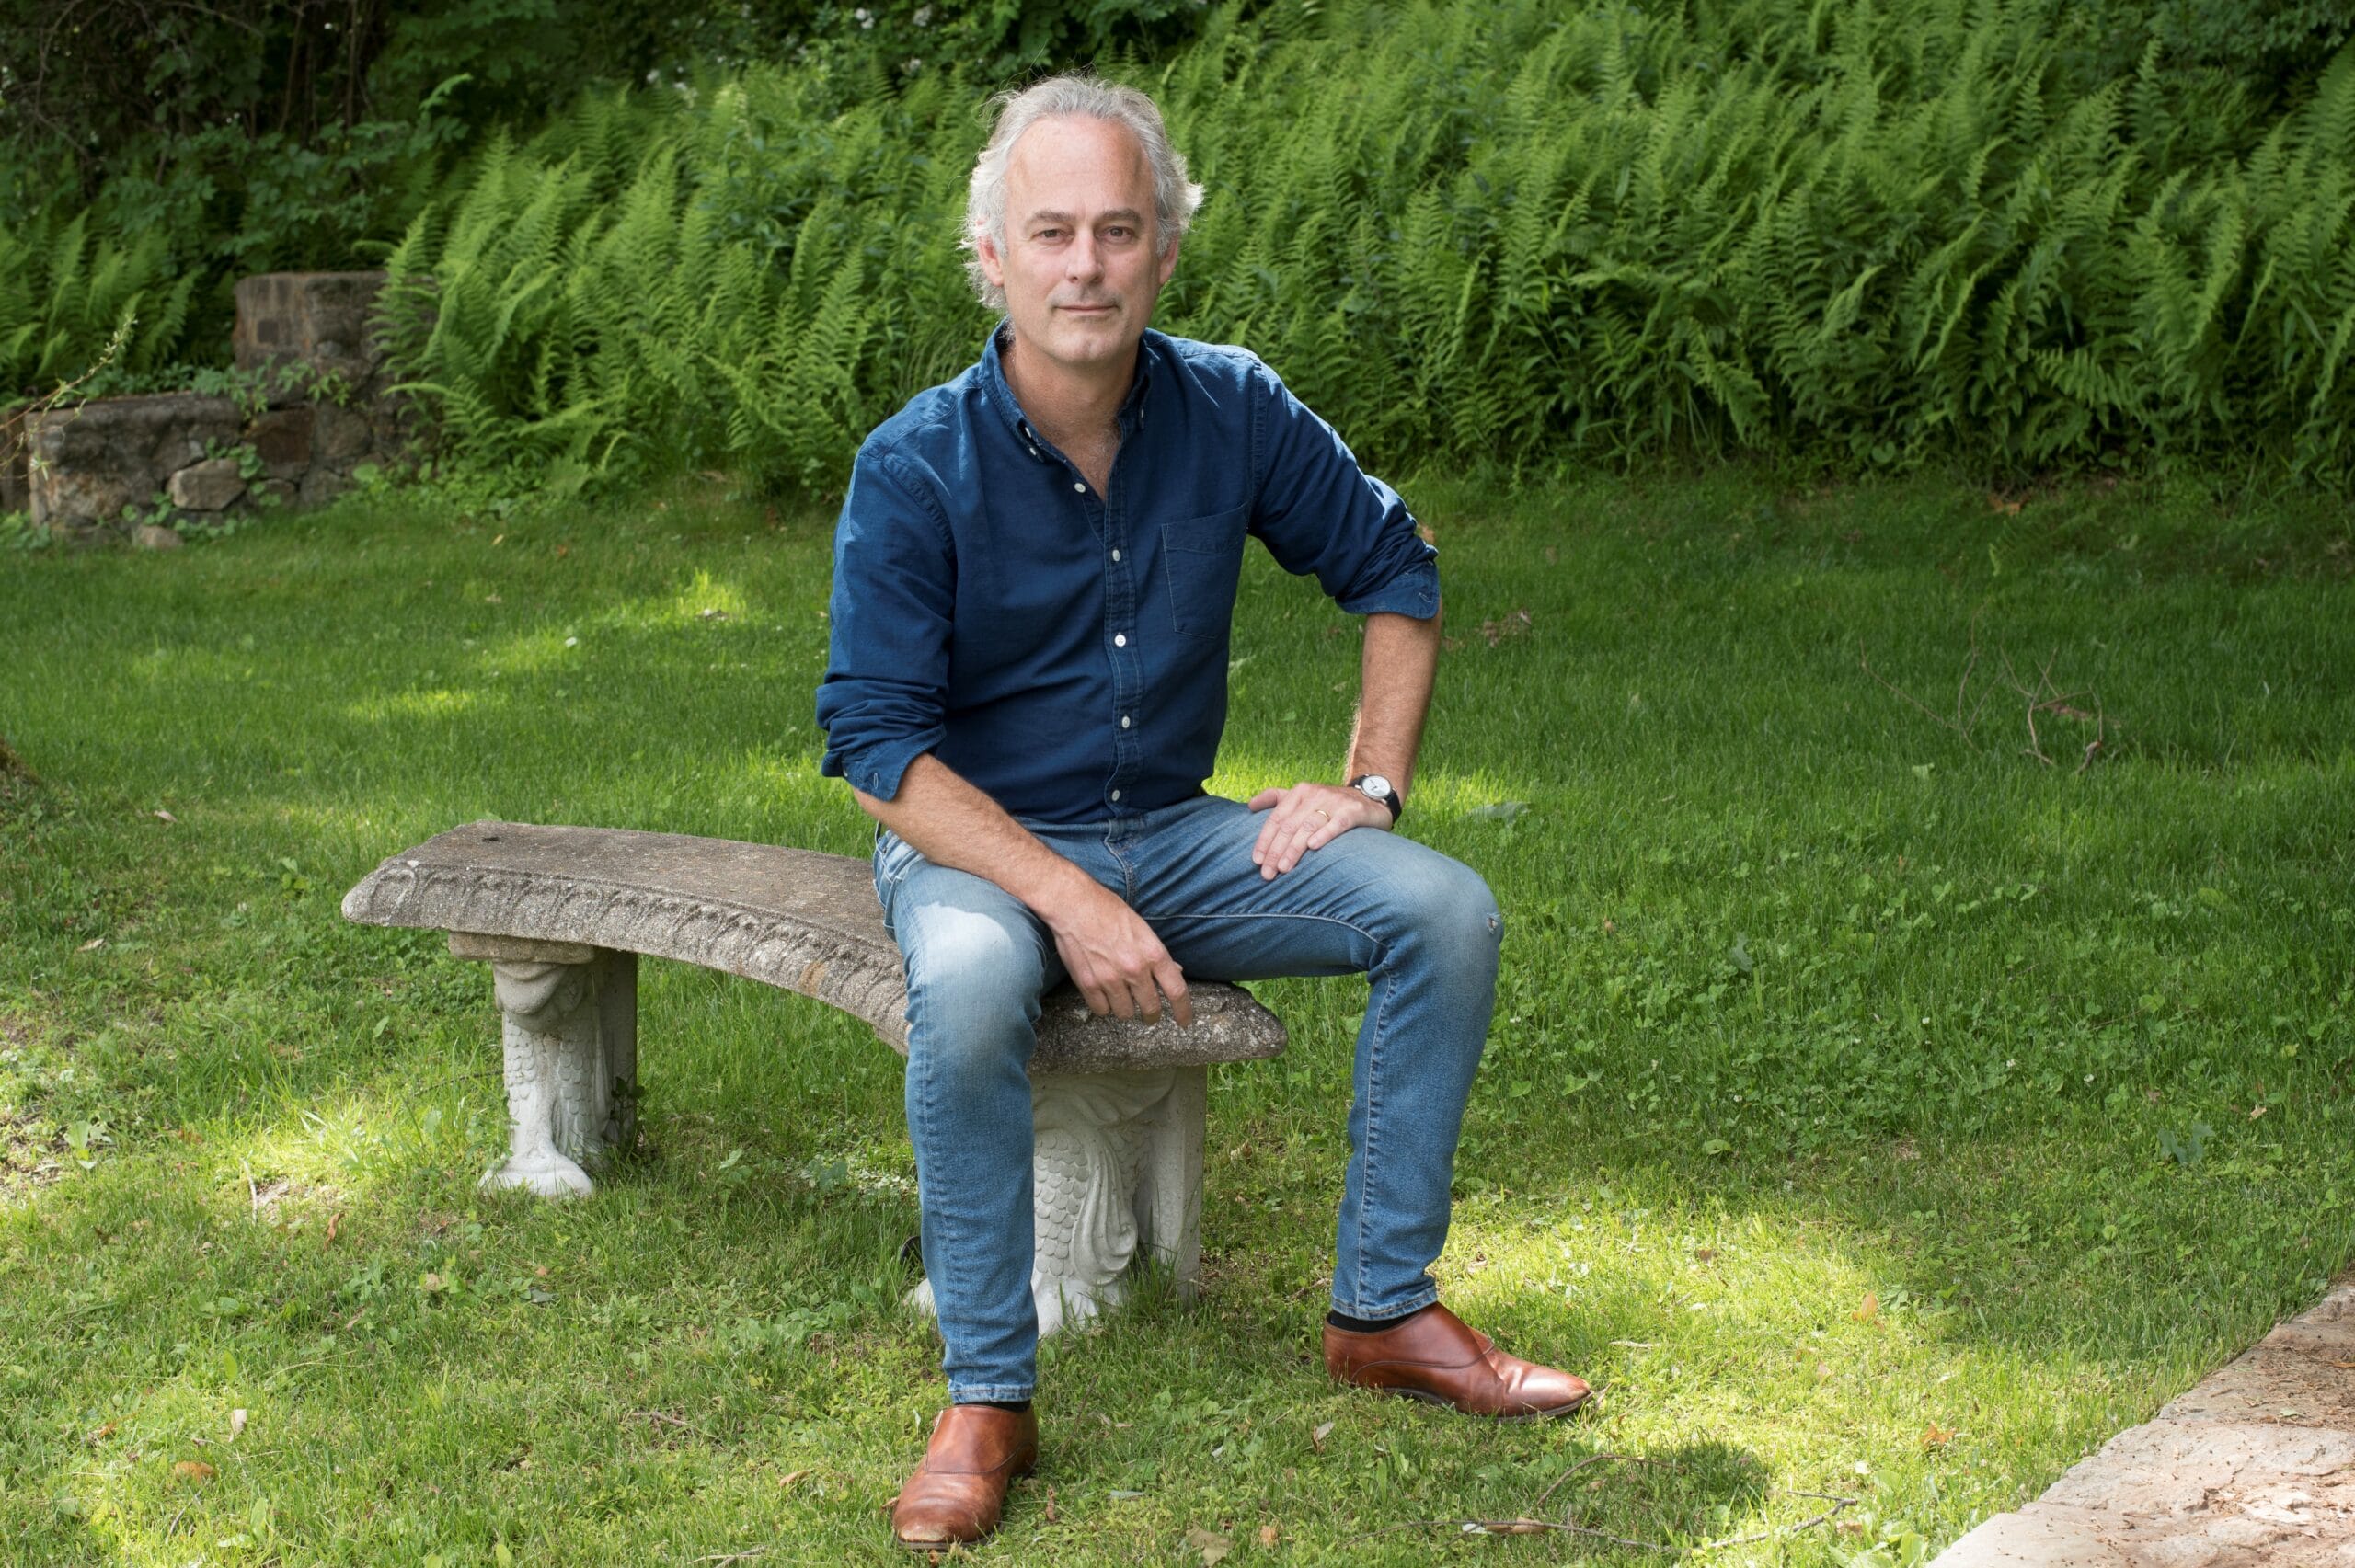 A photo of author Amor Towles sitting on a stone bench.